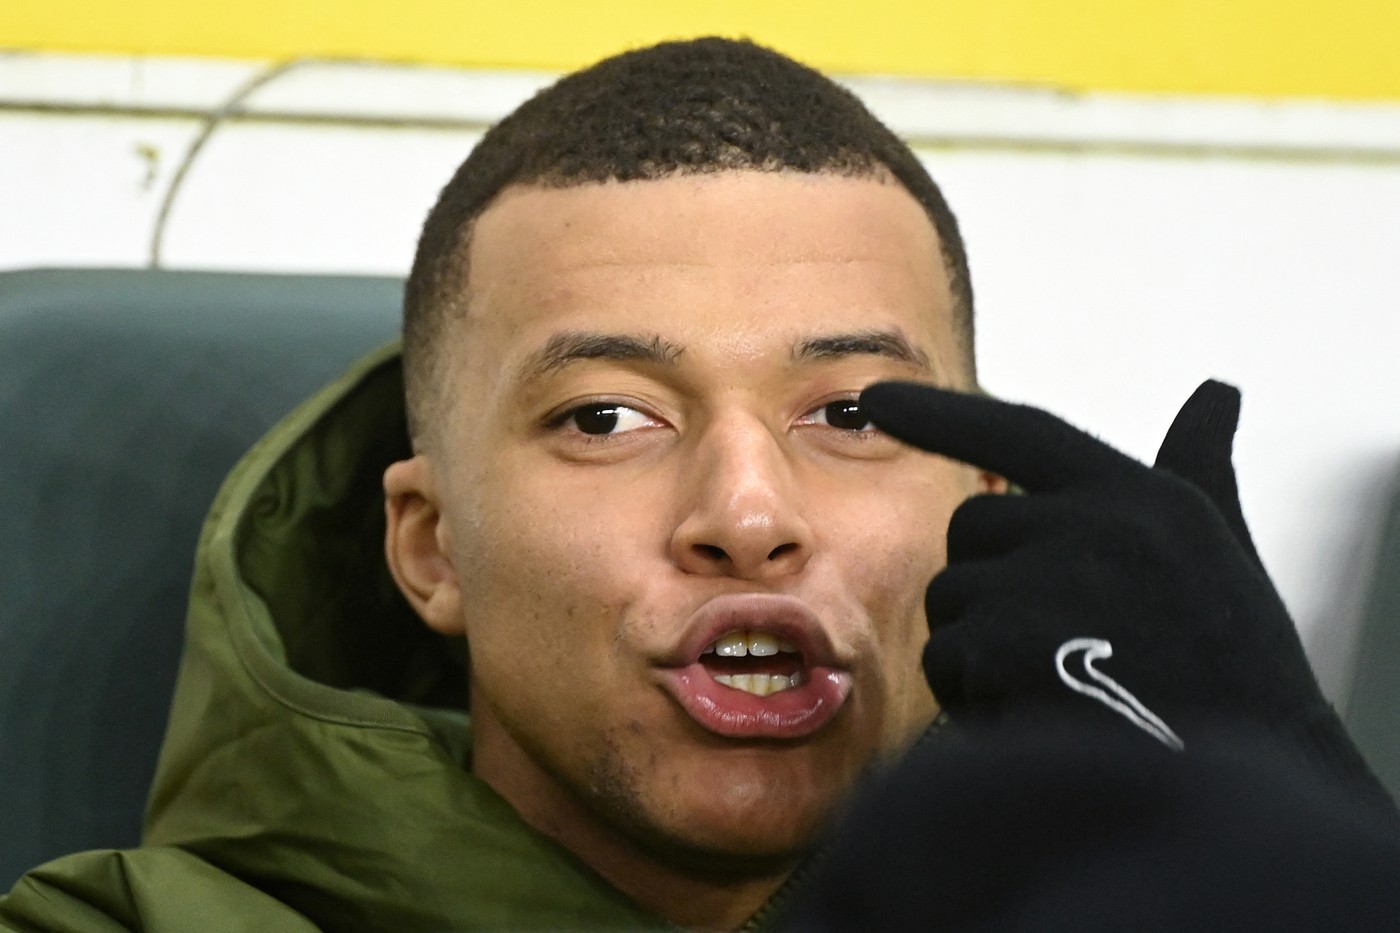 Paris Saint-Germain's French forward #07 Kylian Mbappe reacts prior to the French L1 football match between FC Nantes and Paris Saint-Germain (PSG) at the La Beaujoire stadium in Nantes, western France, on February 17, 2024.,Image: 847710599, License: Rights-managed, Restrictions: , Model Release: no